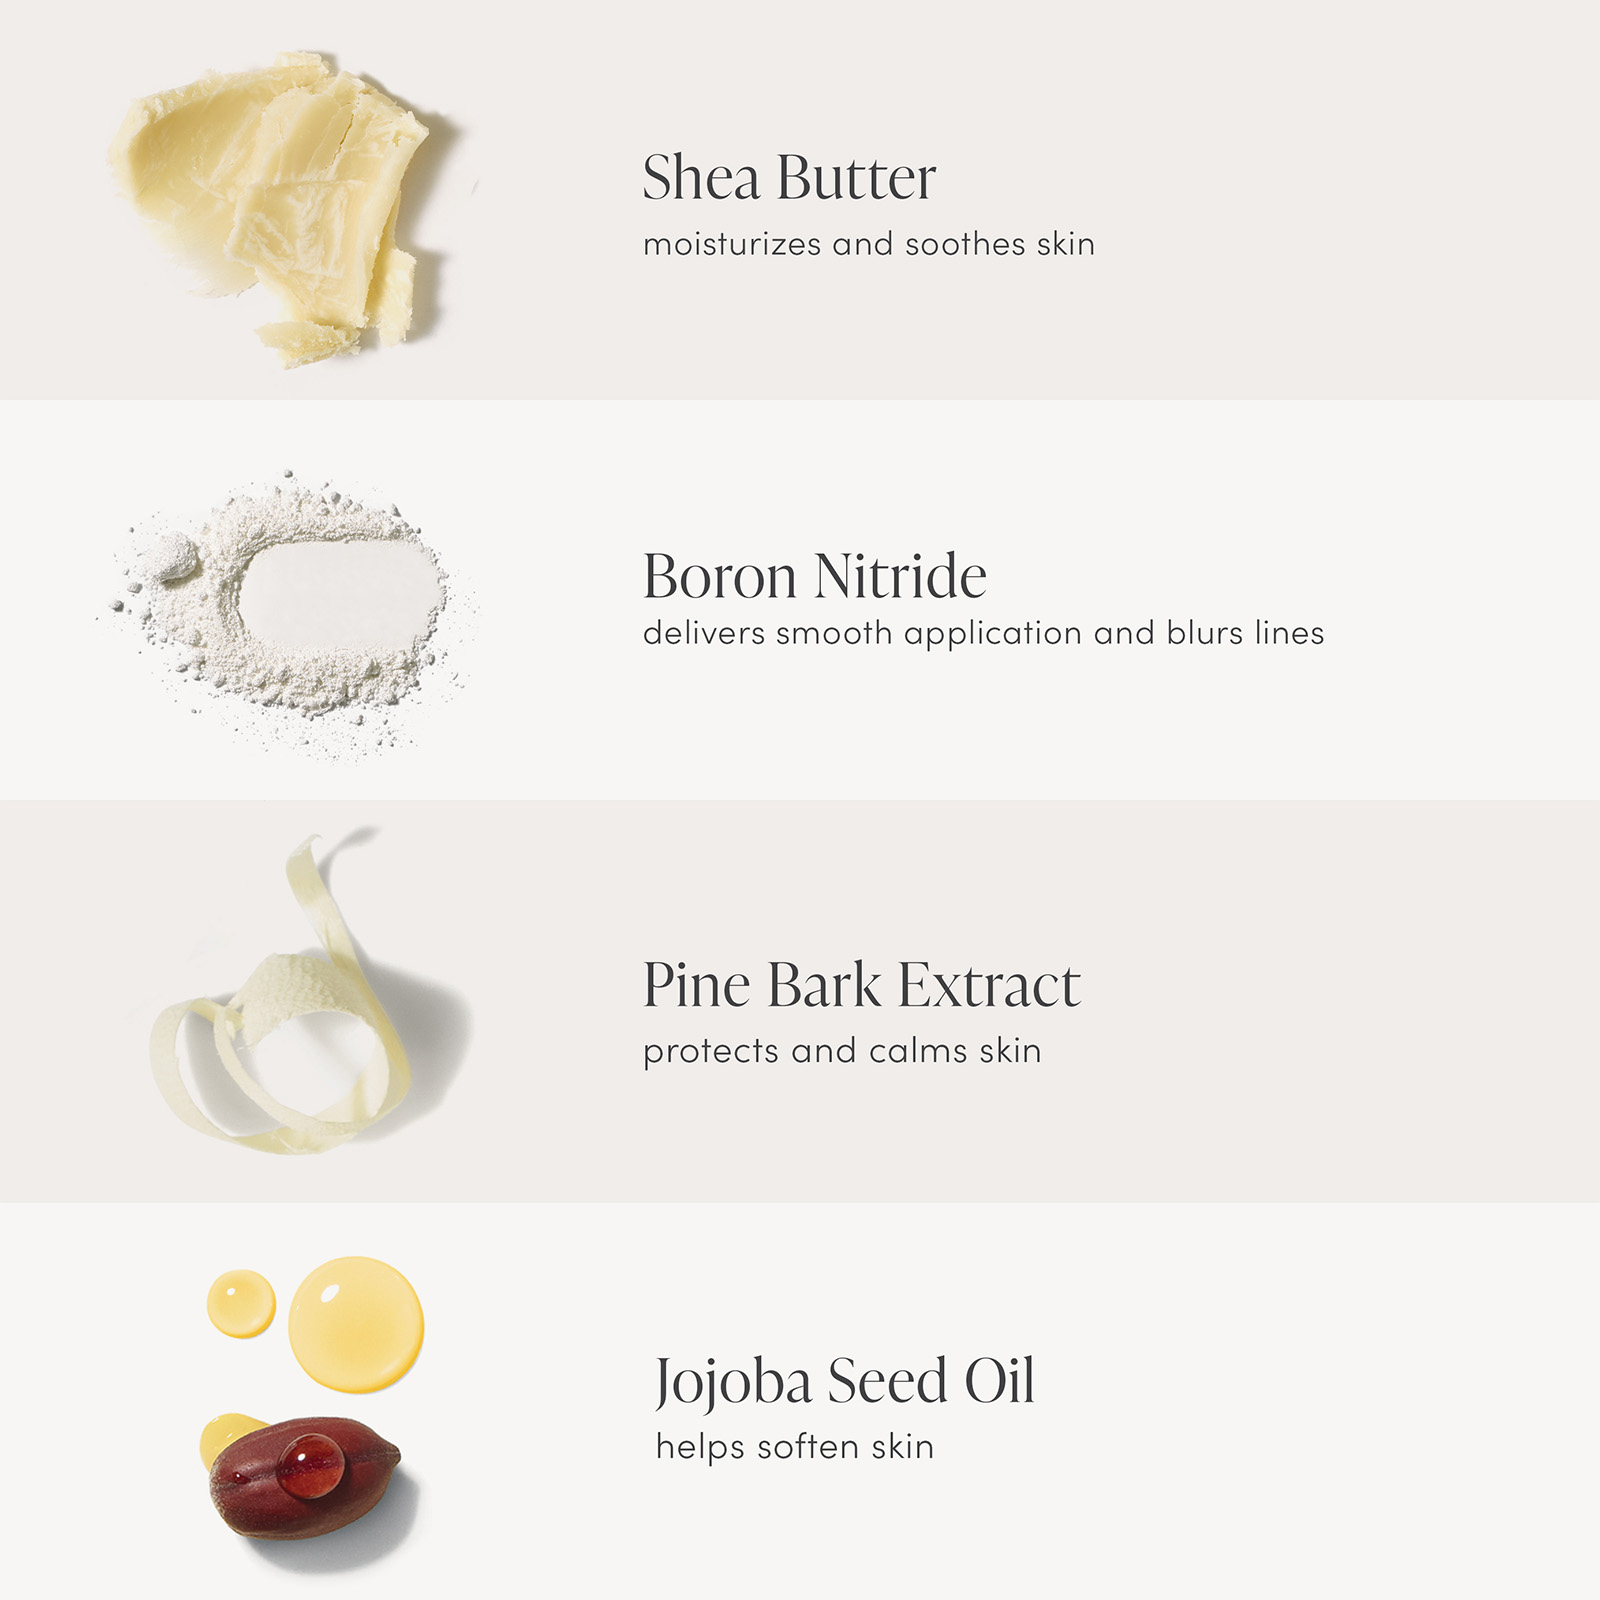 Shea Butter moisturizes and soothes skin,Boron Nitride delivers smooth application and blurs lines, Pine Bark Extract protects and calms skin, Jojoba Seed Oil helps soften skin